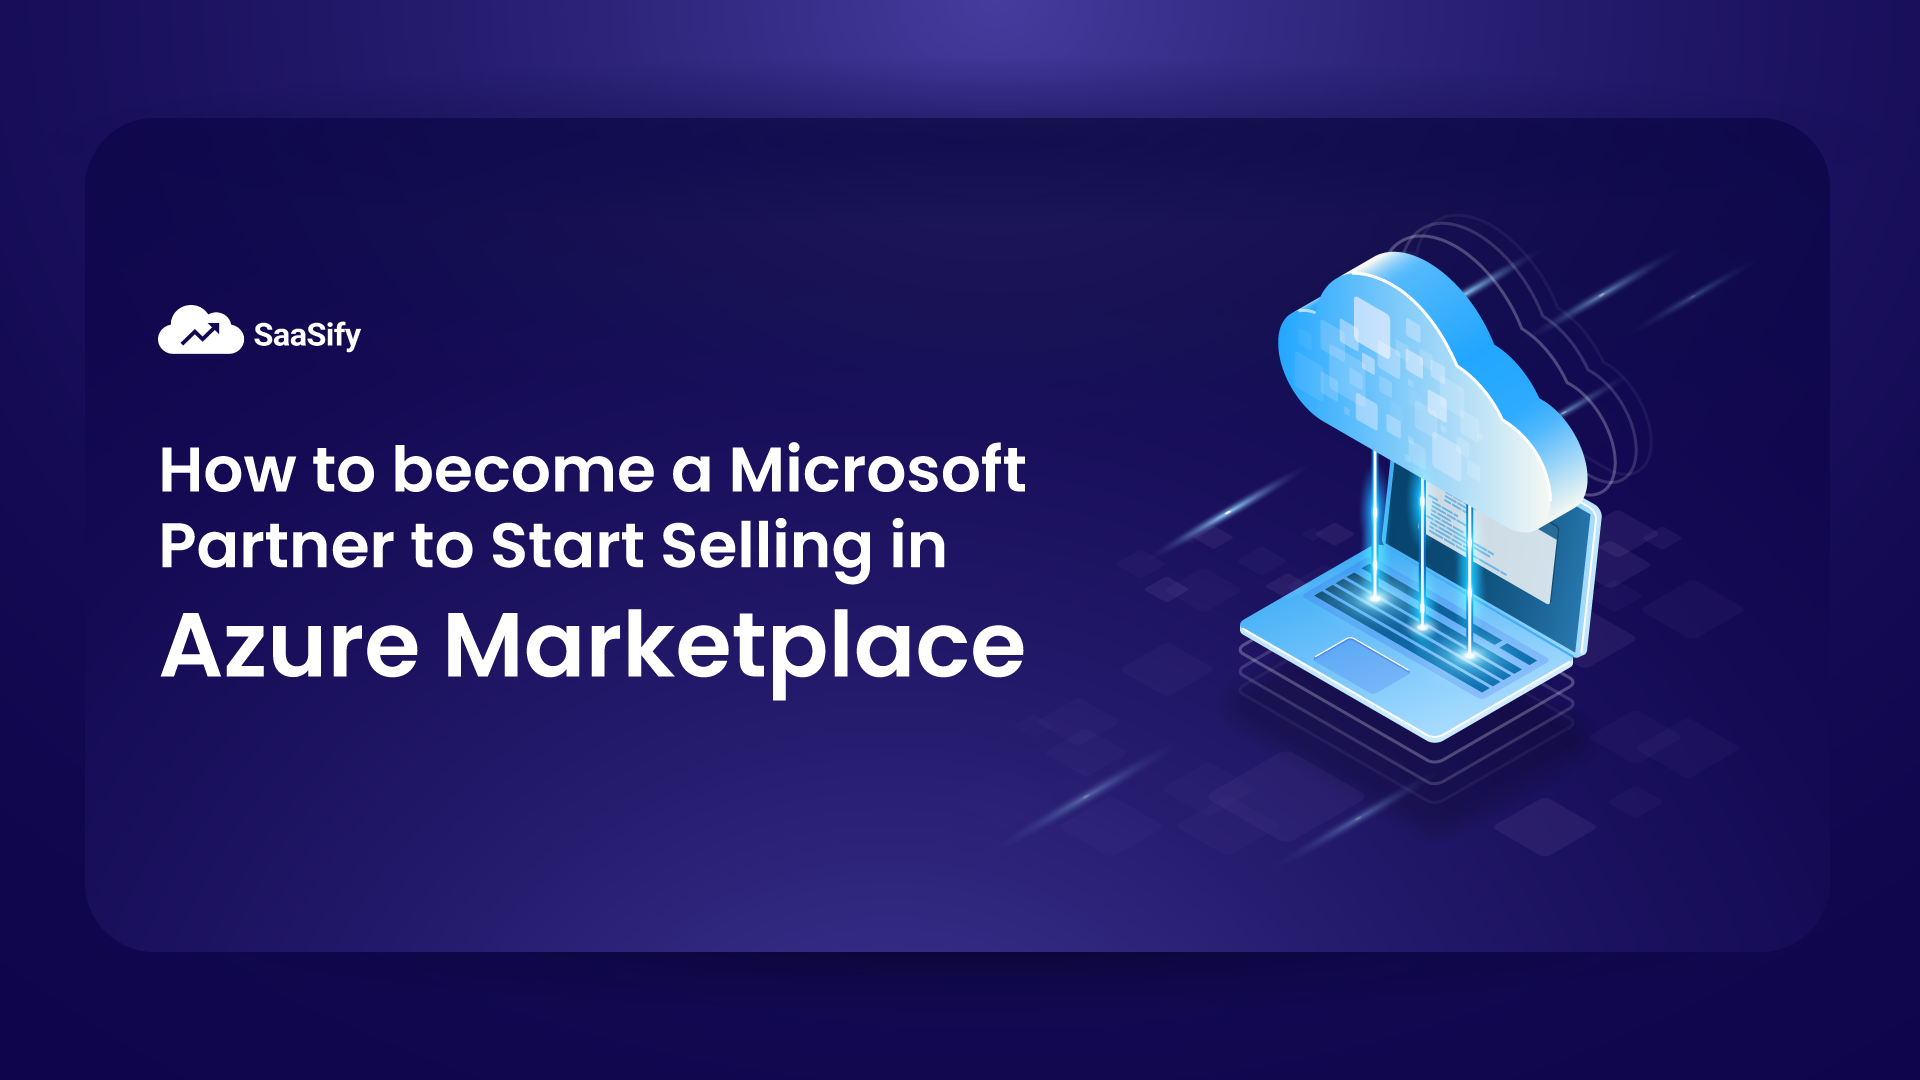 How to successfully become a Microsoft Partner to Start Selling in Azure Marketplace